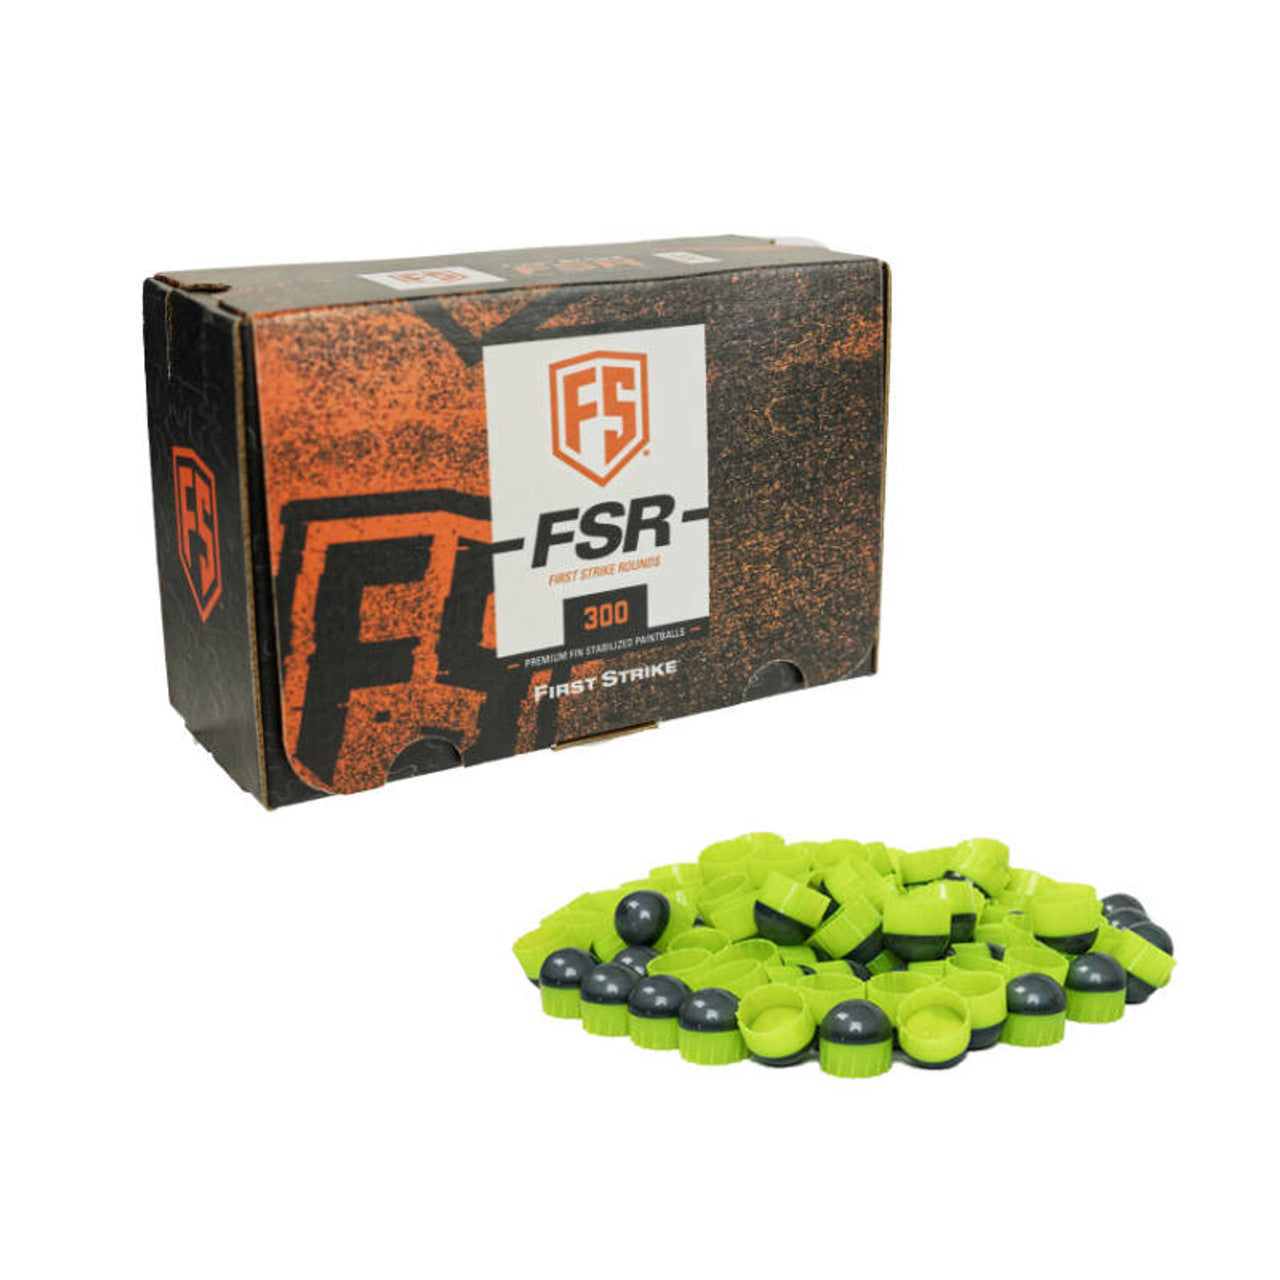 First Strike 300 Rounds - Eminent Paintball And Airsoft